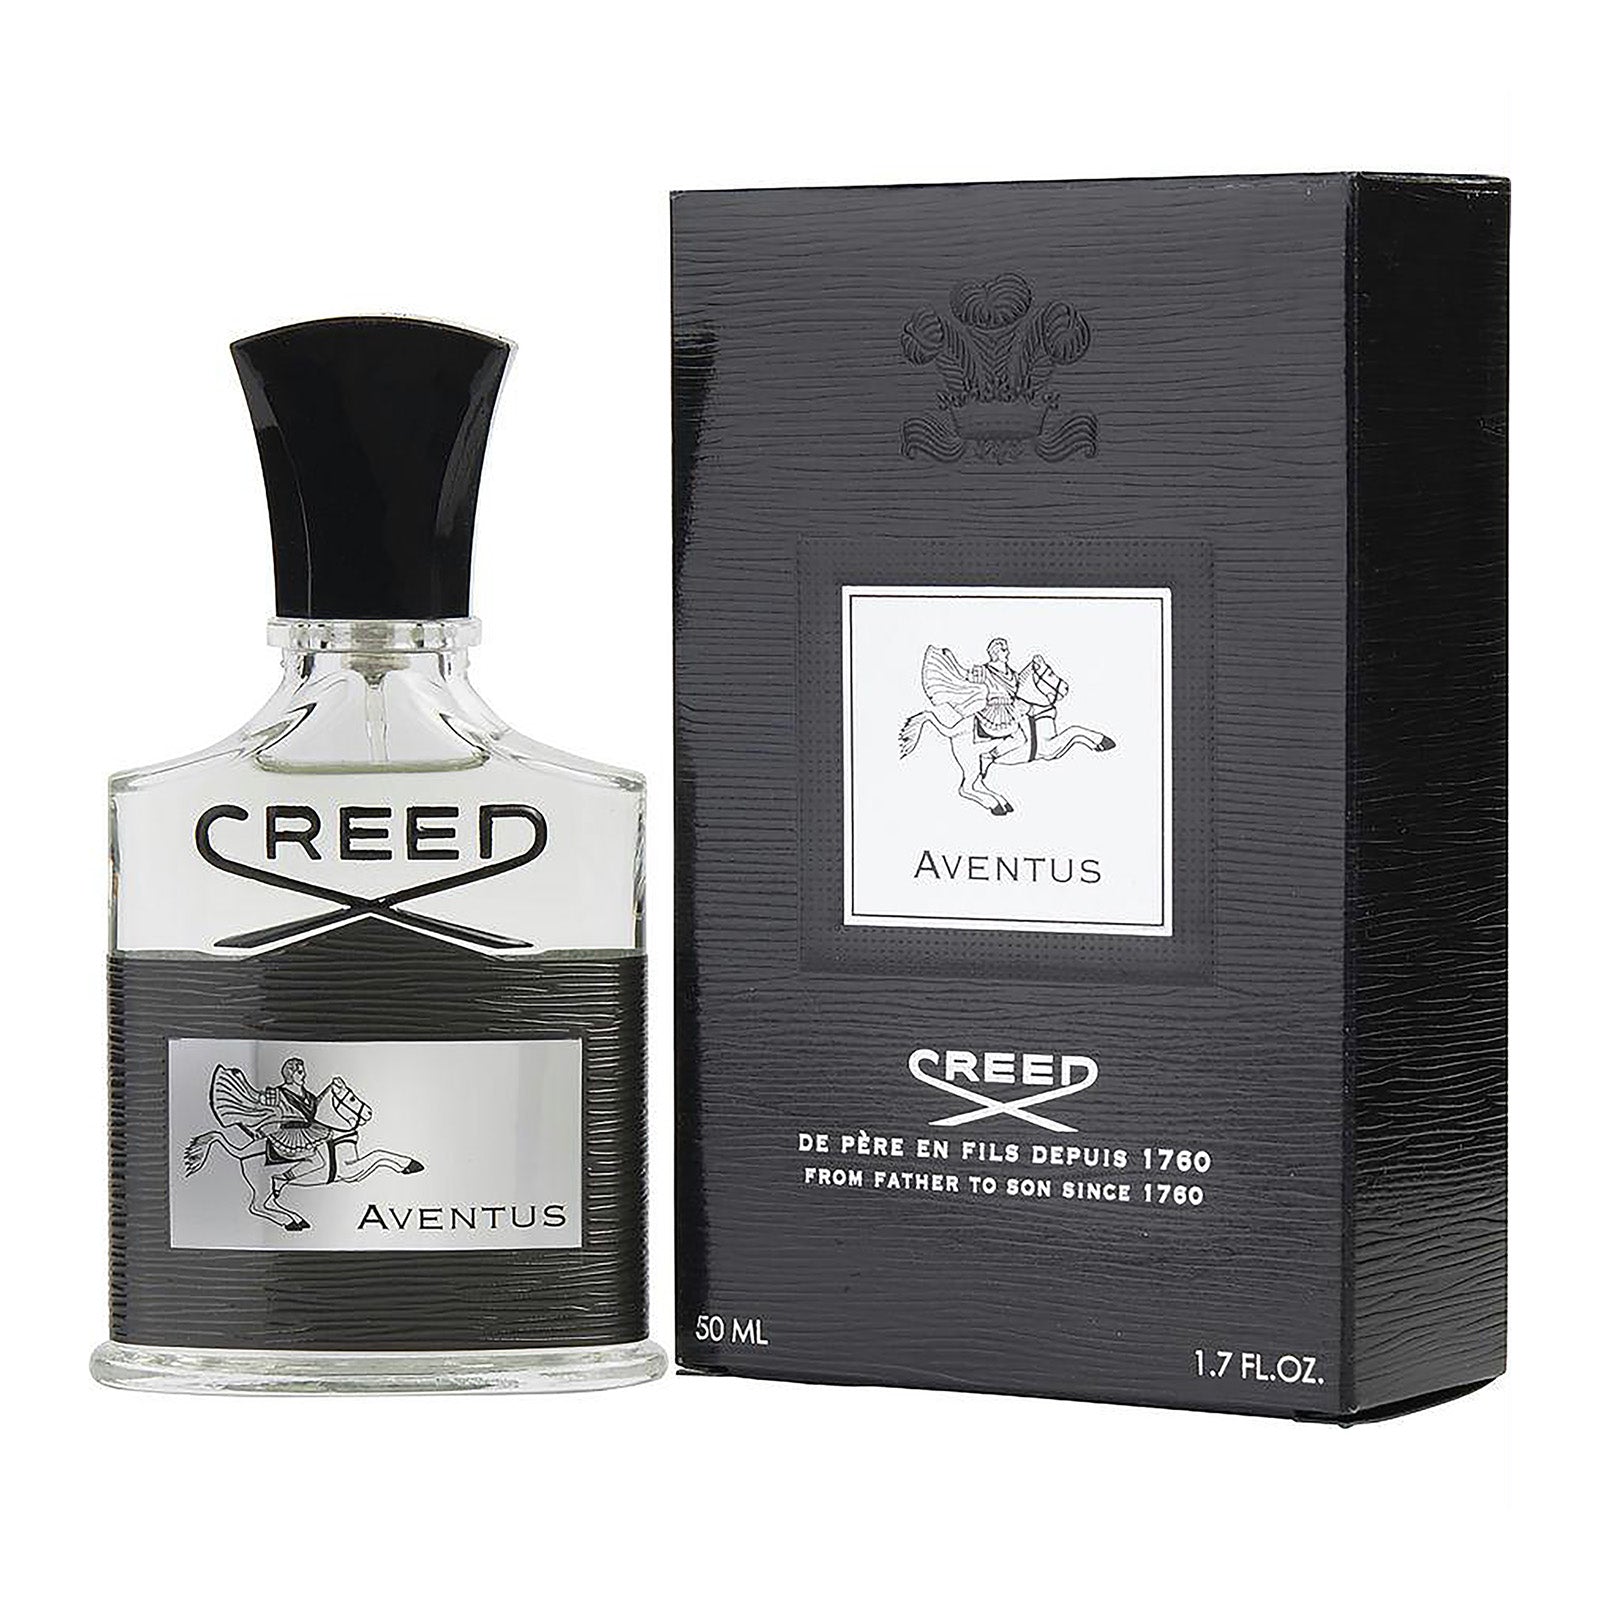 Why Choose Creed Aventus Perfume for Timeless Scent and Quality ...